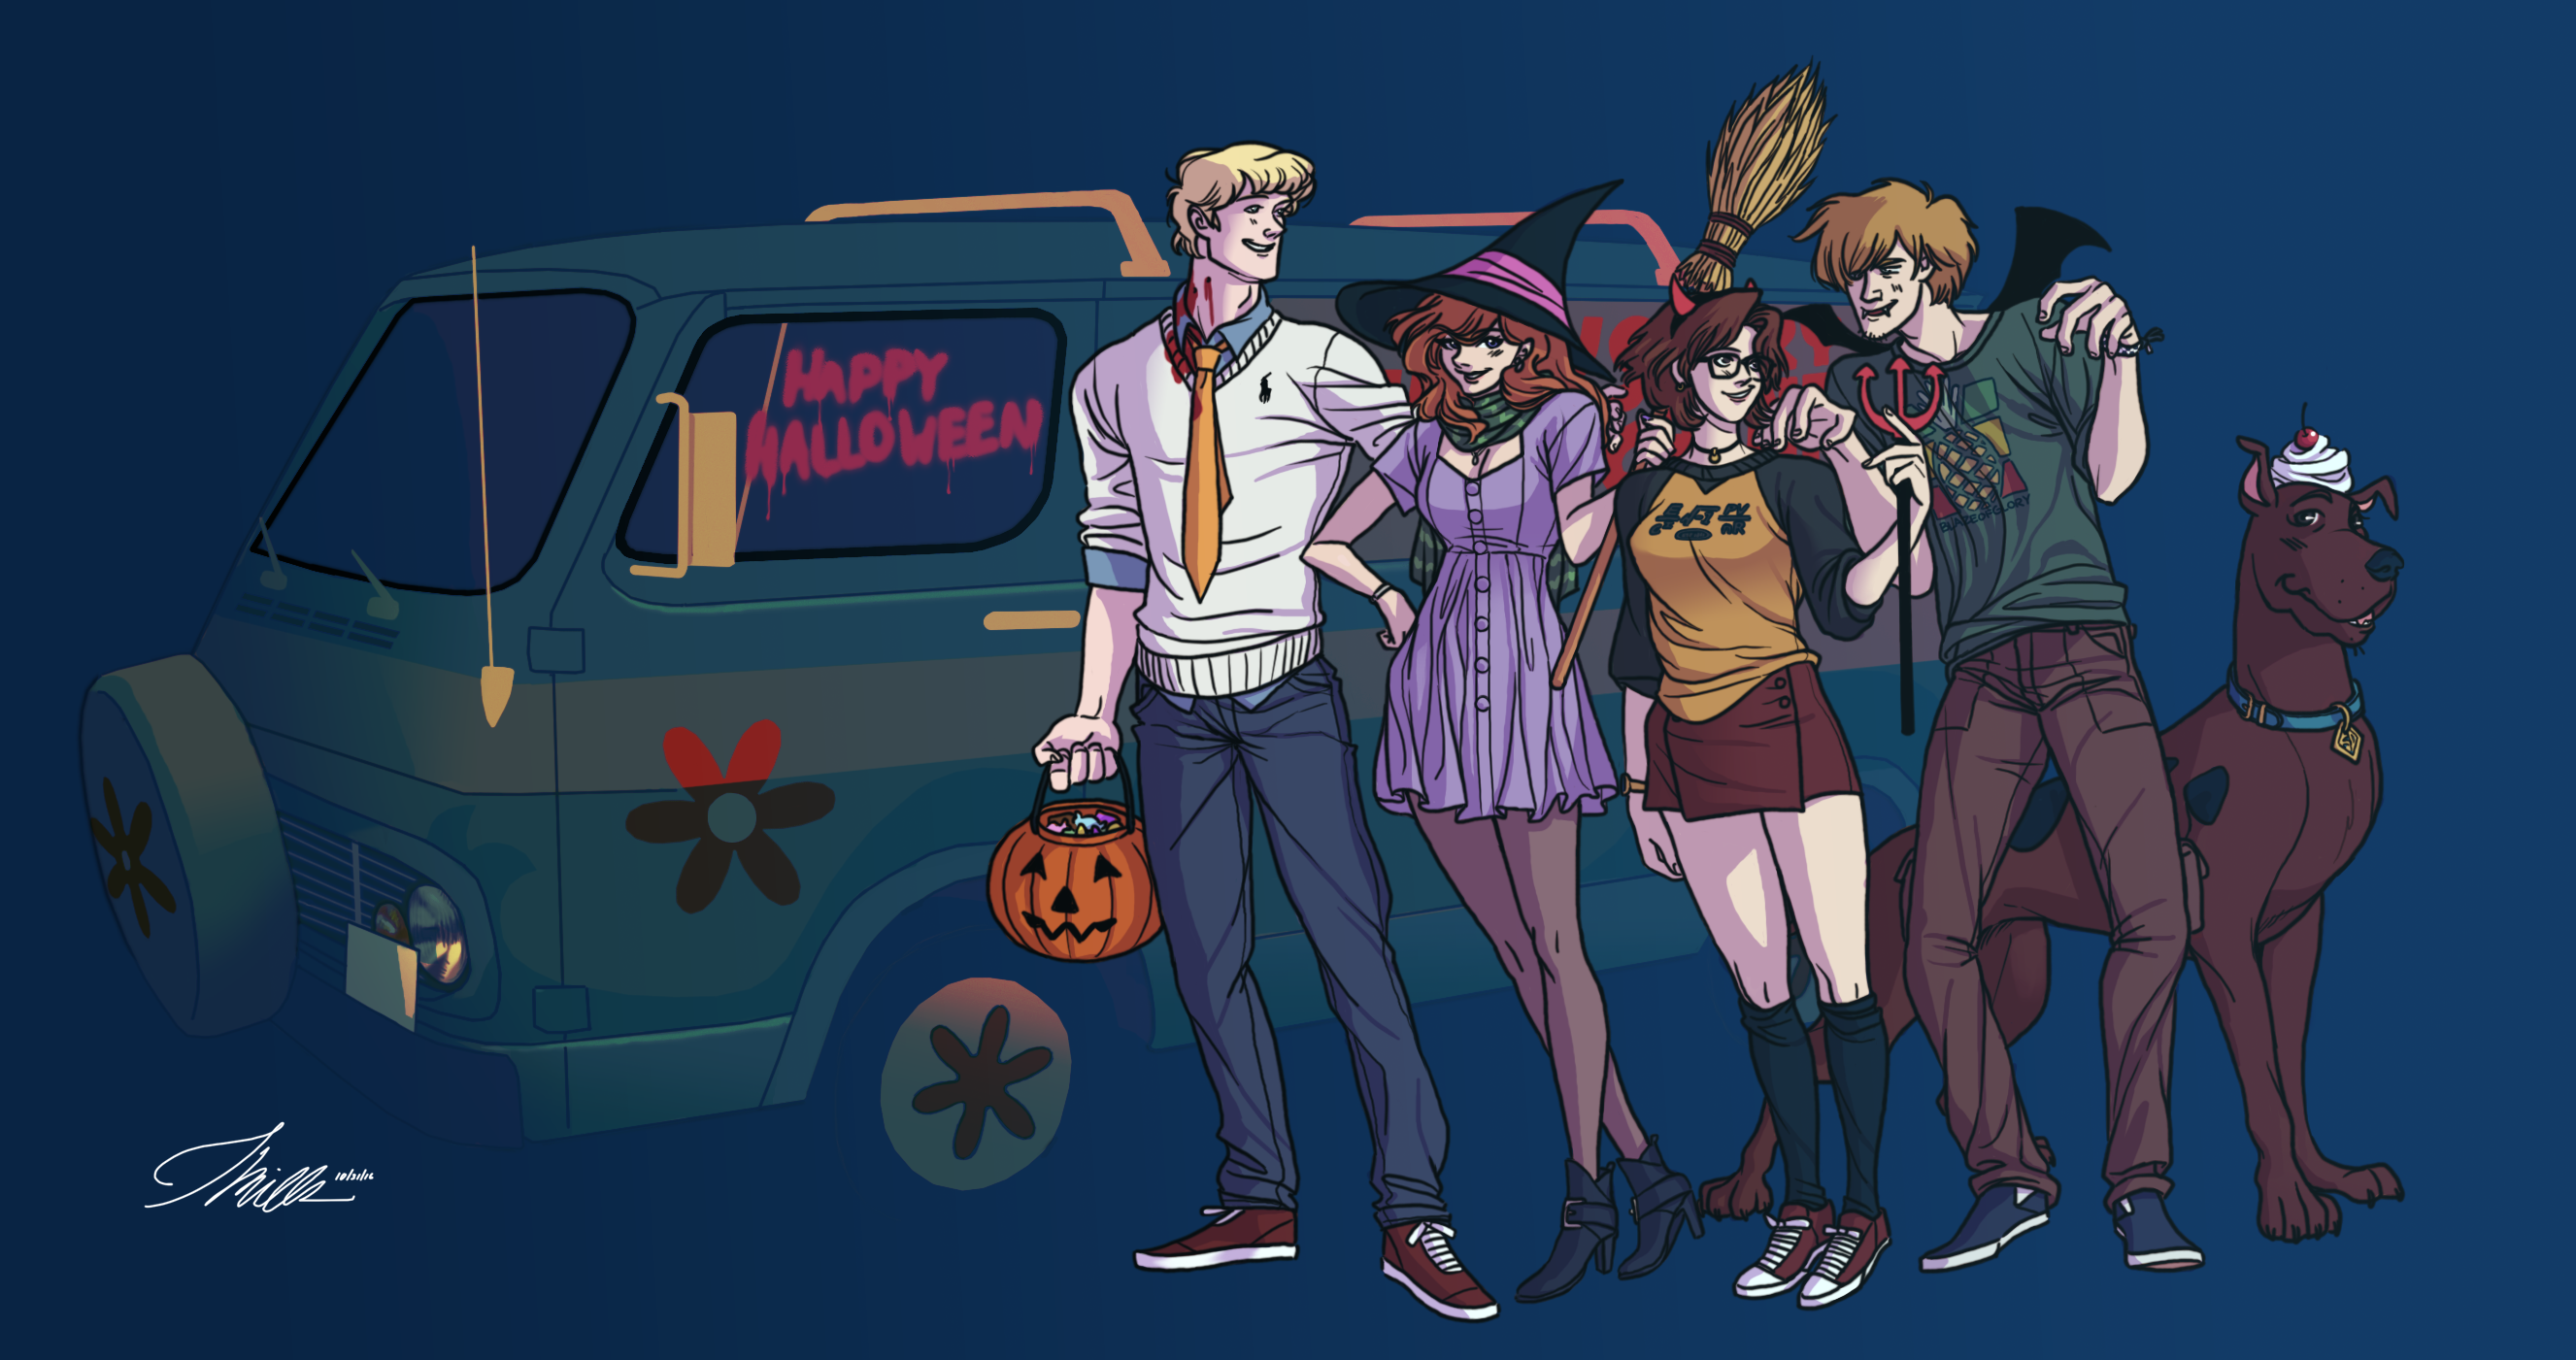 scooby_halloween_by_zerohope2survive-daivh1l.png.